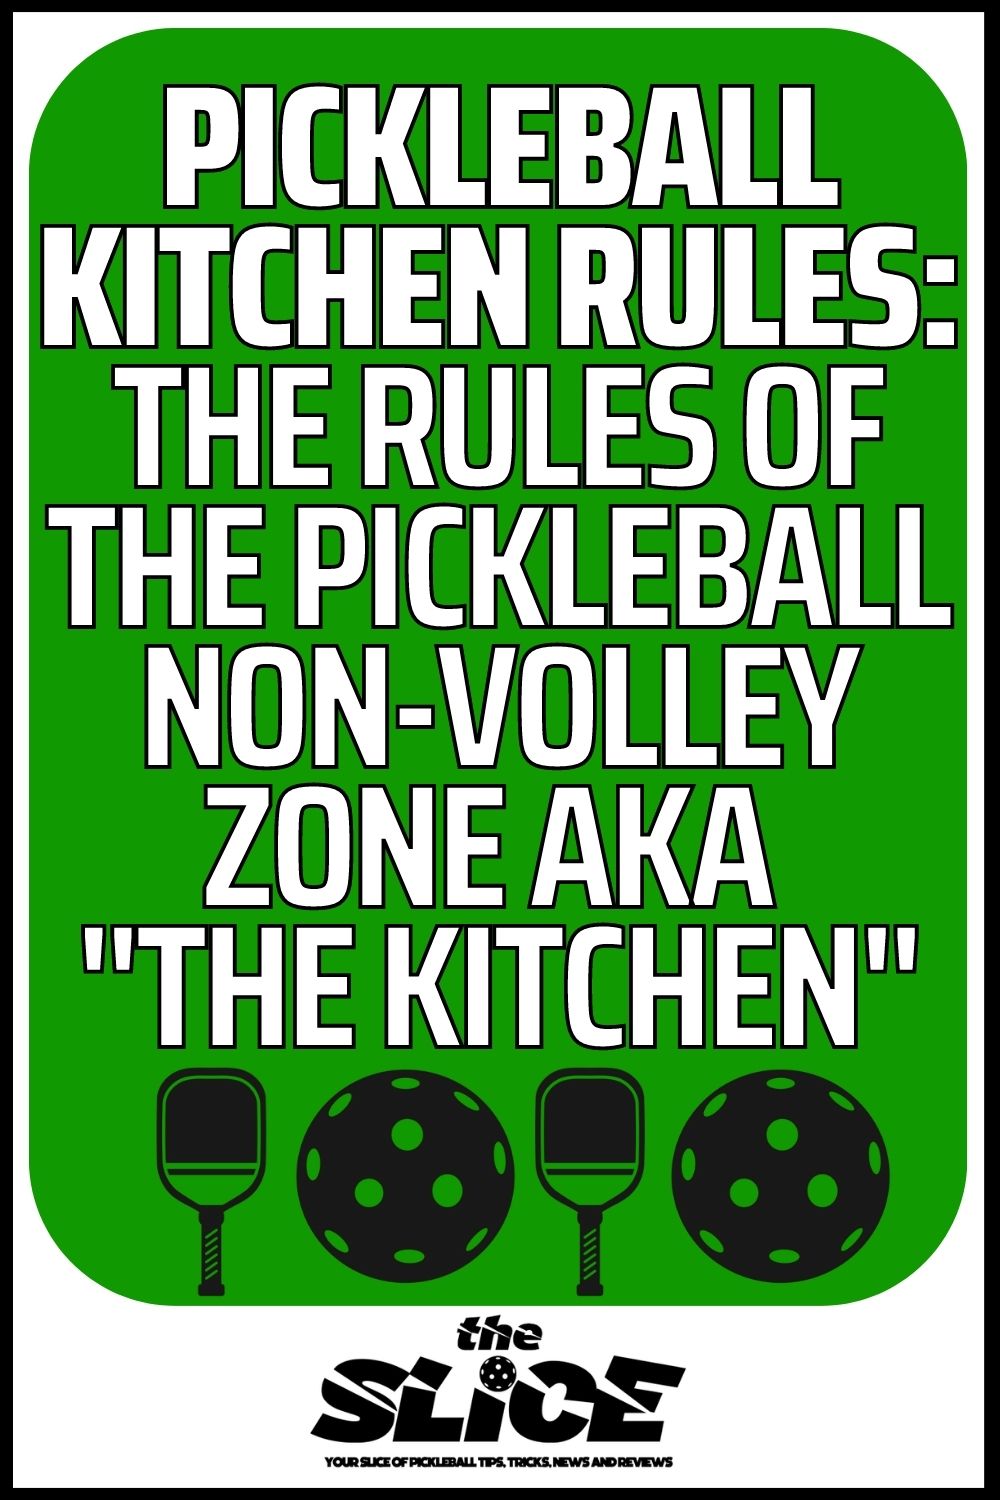 Pickleball Kitchen Rules The Rules of Pickleball Non Volley Zone